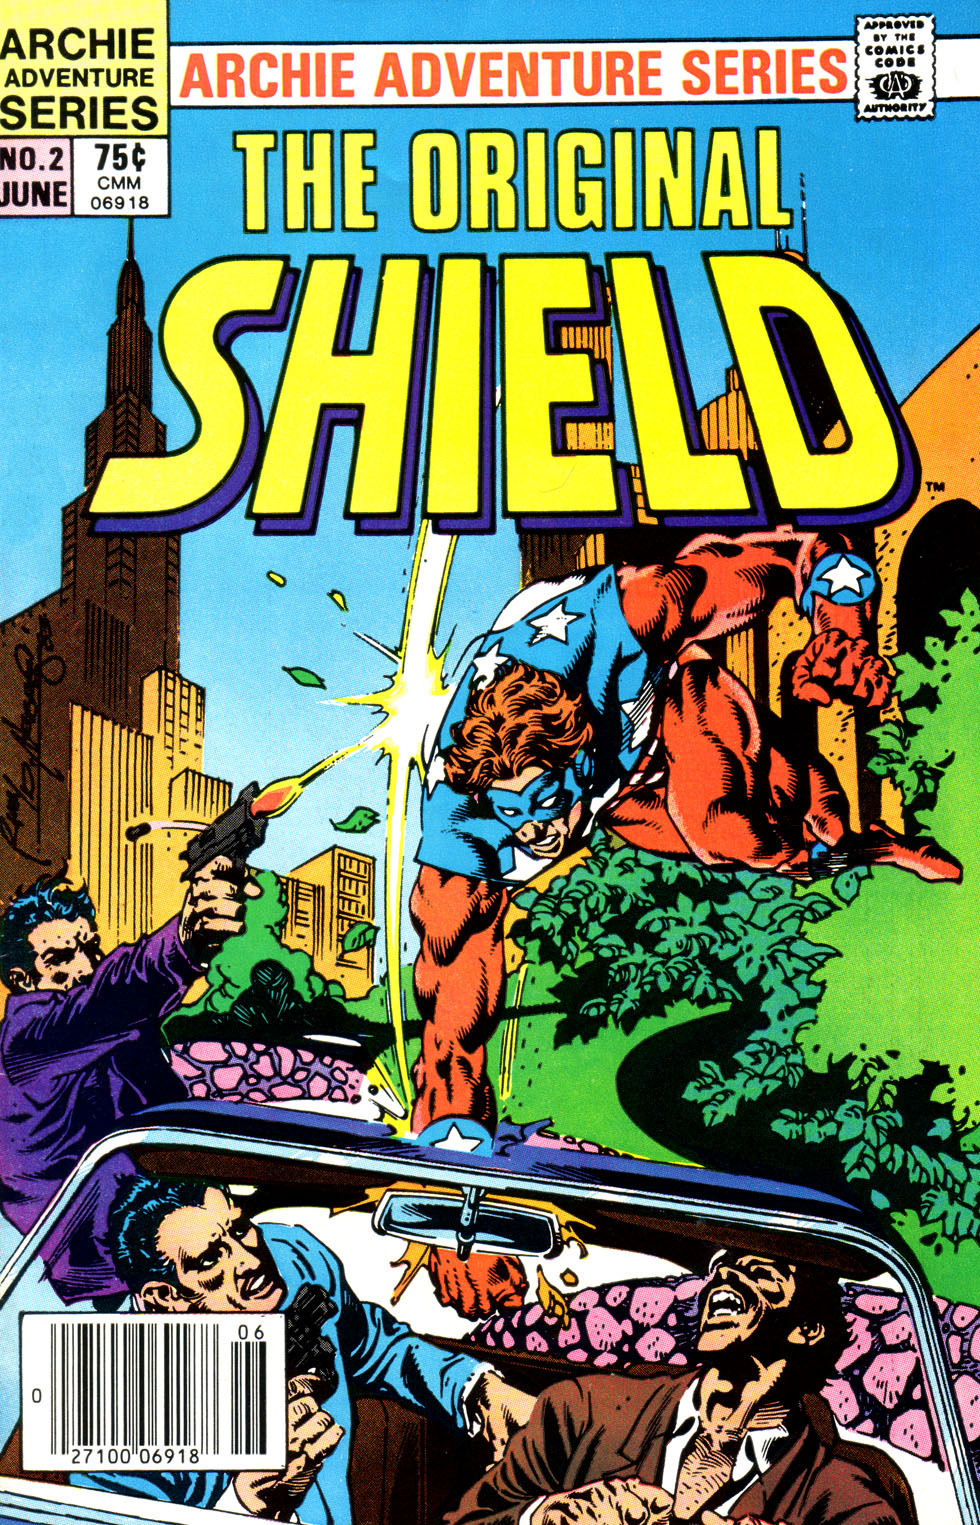 Read online The Original Shield comic -  Issue #2 - 2